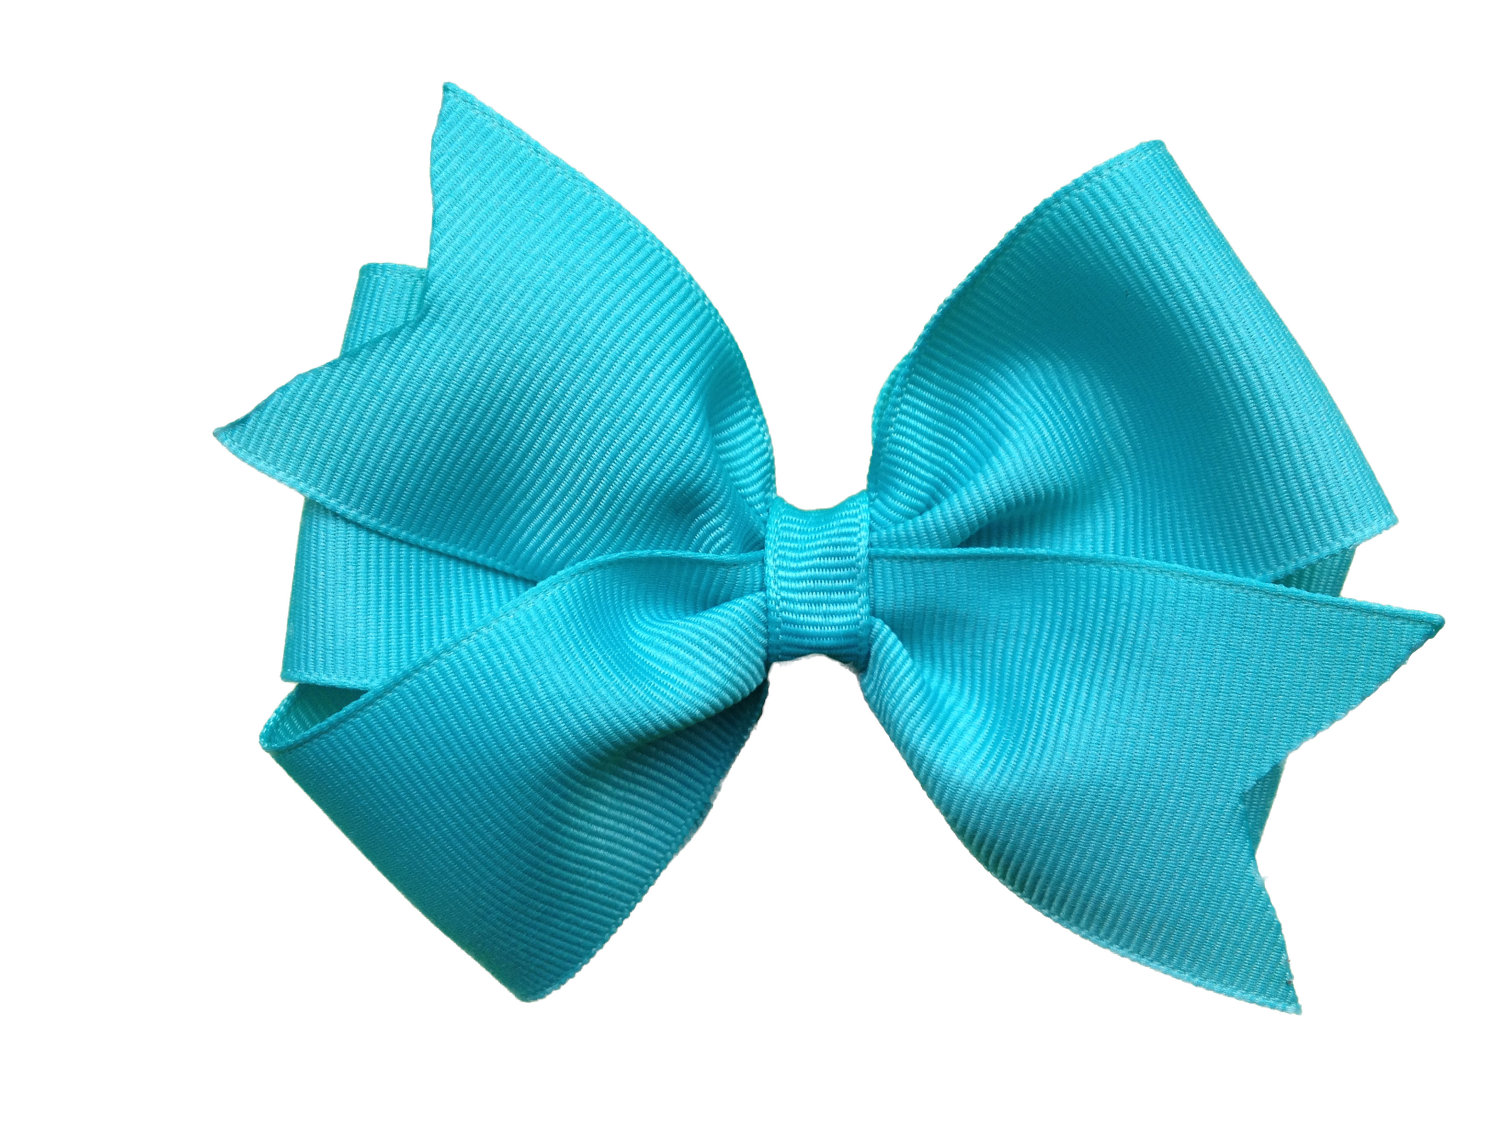 Inch Turquoise Hair Bow Turquoise Bow By Browneyedbowtique